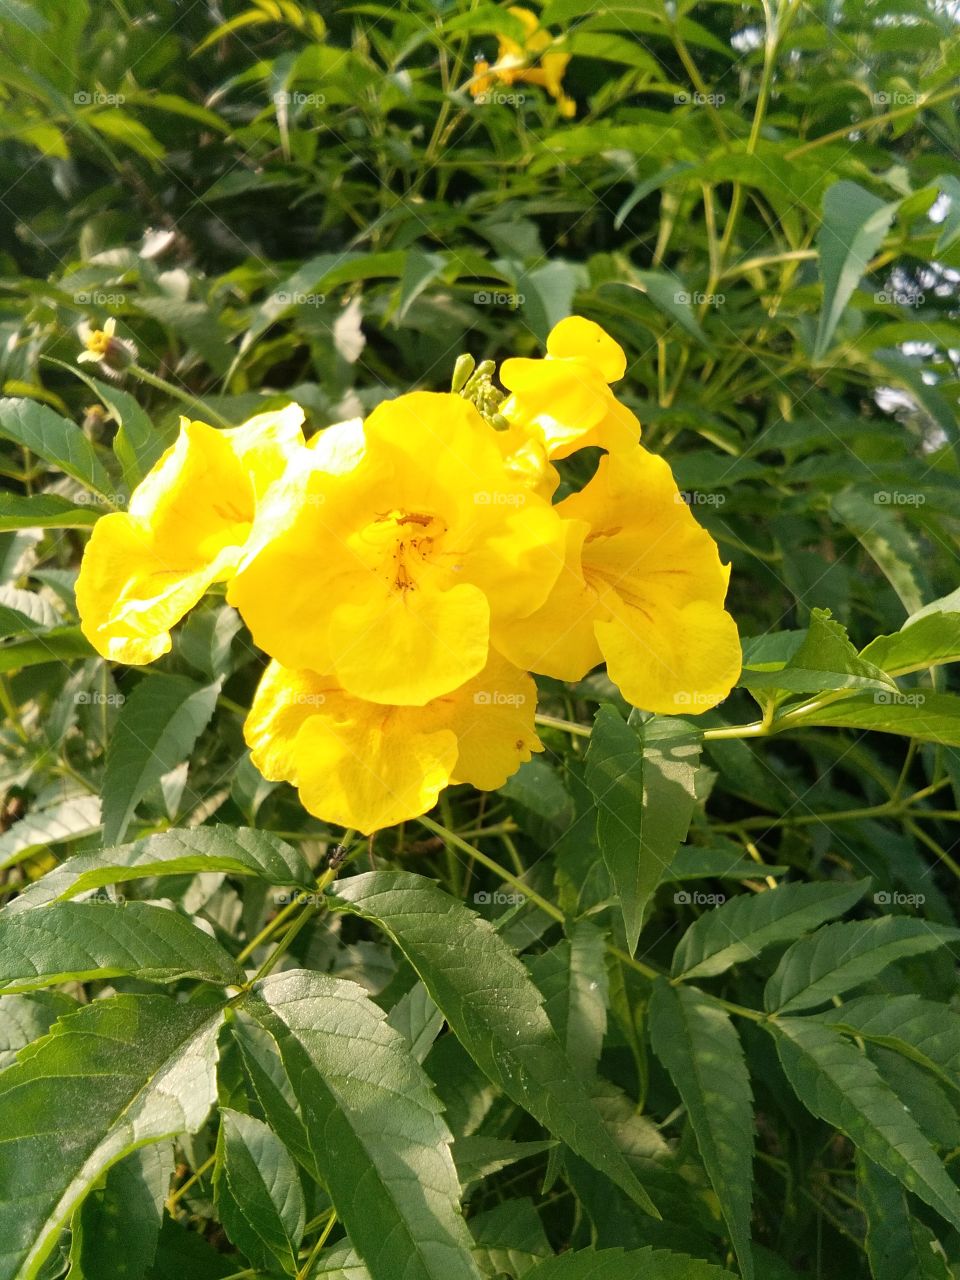 the beautiful flower and look this flower at yellow color